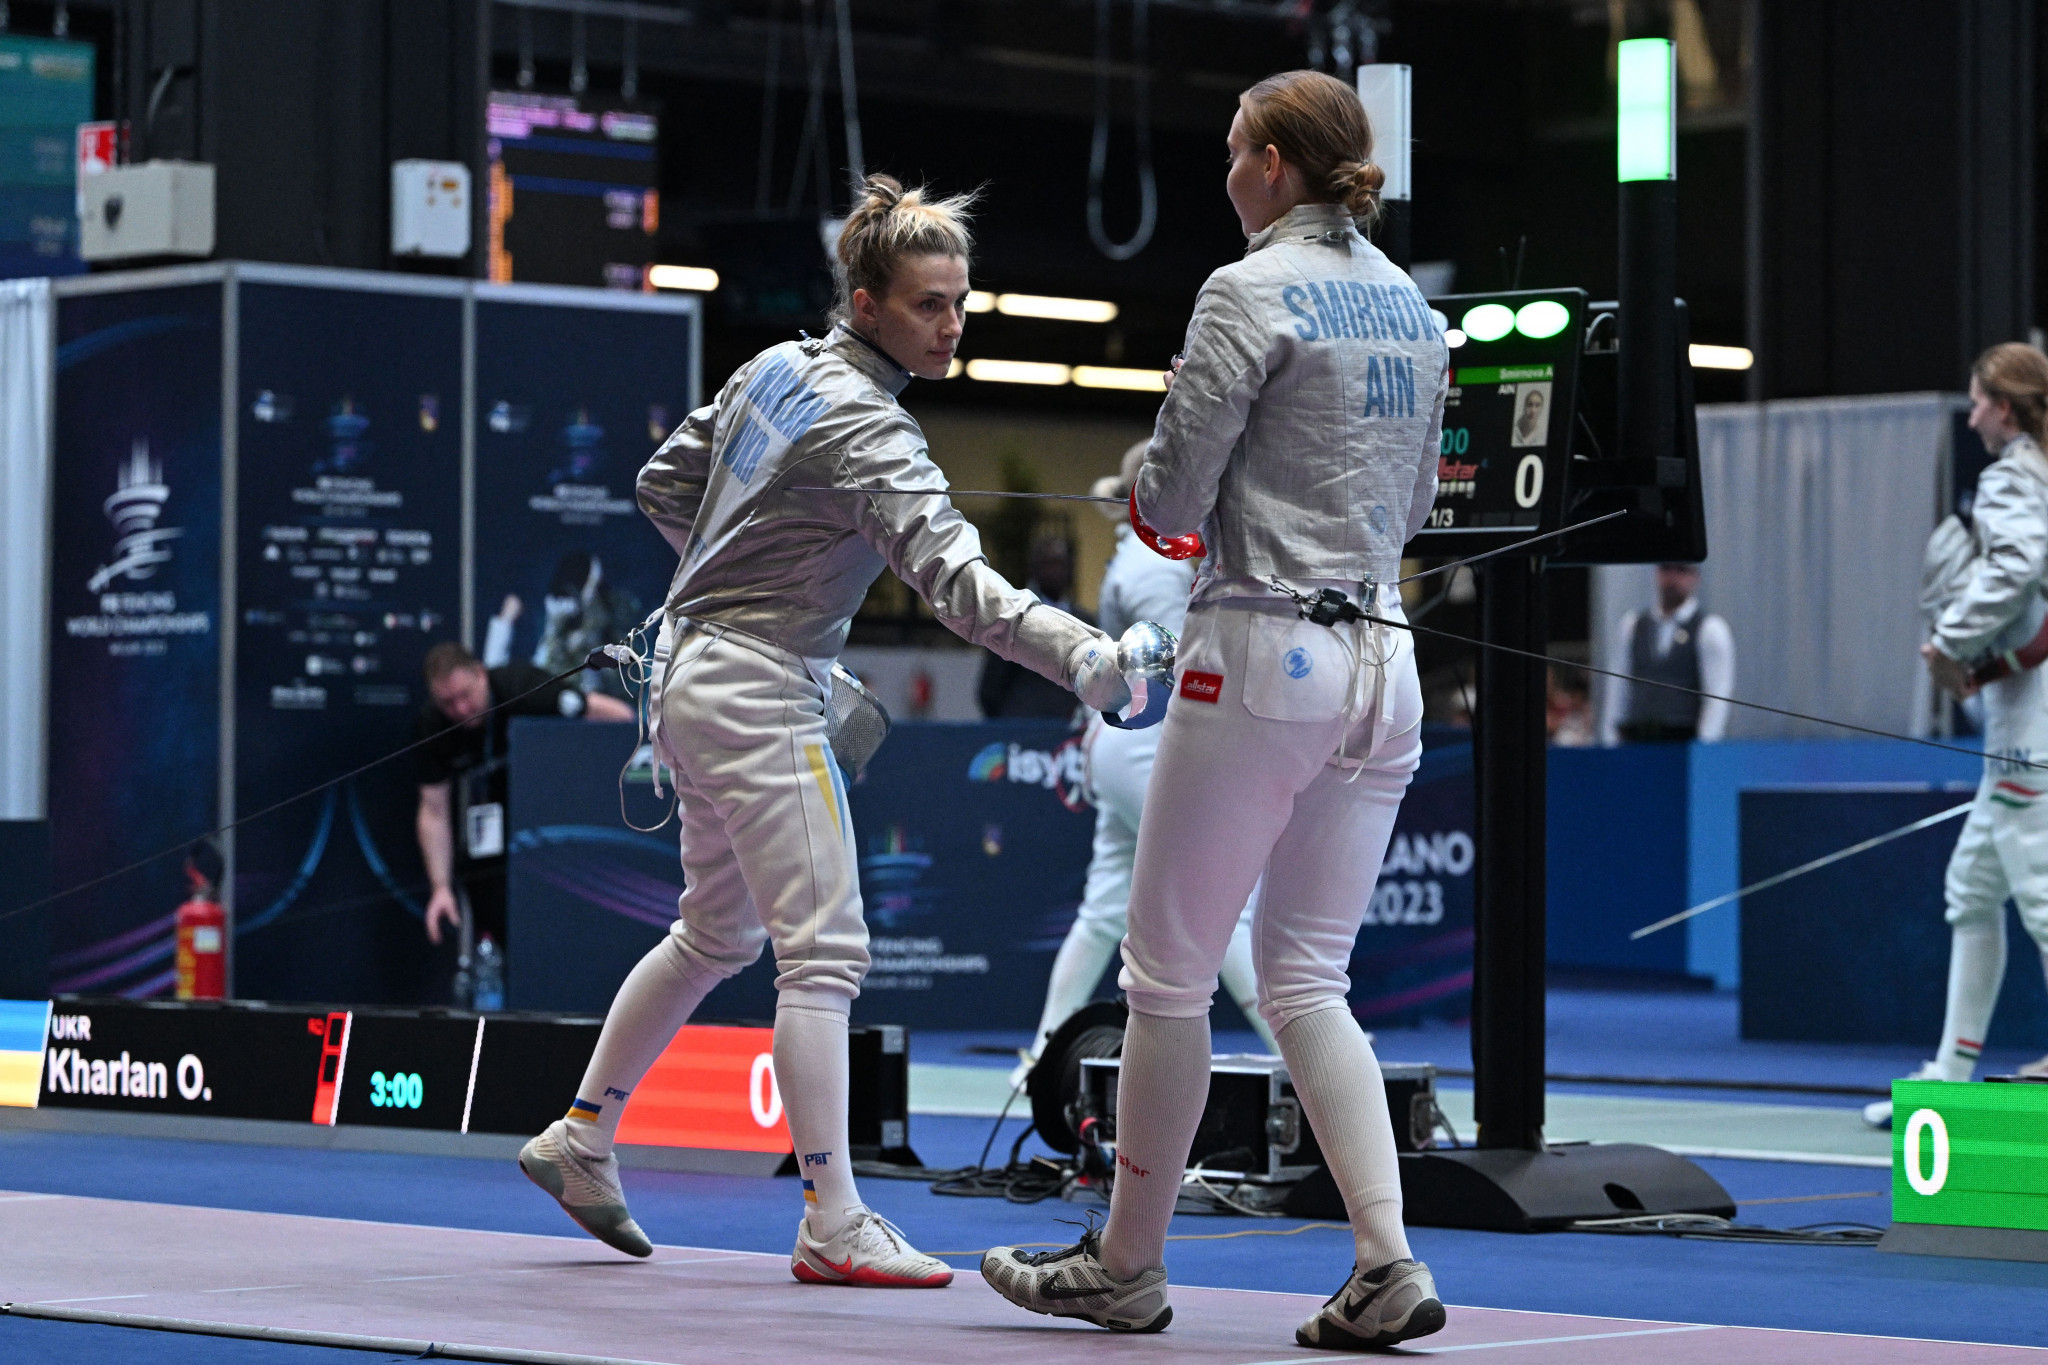 IOC President Thomas Bach promised Ukraine's Olha Kharlan, left, a place at Paris 2024 even if she did not qualify after she was disqualified at the Fencing World Championships in Milan when she refused to shake the hand of Anna Smirnova, right, her Russian opponent ©Getty Images